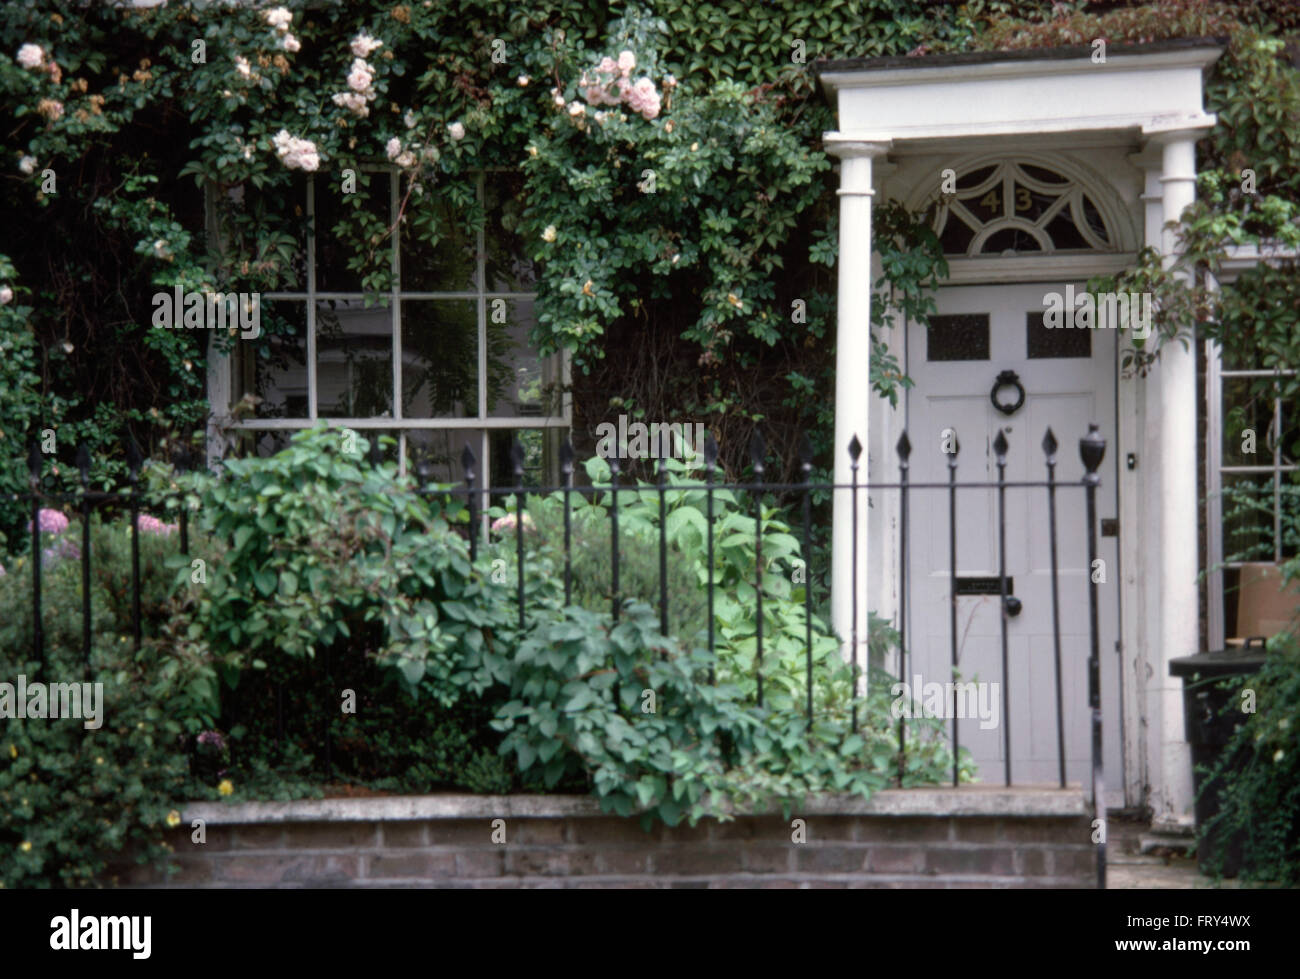 Wrought iron railings on front garden of townhouse with a white front door and porch Stock Photo